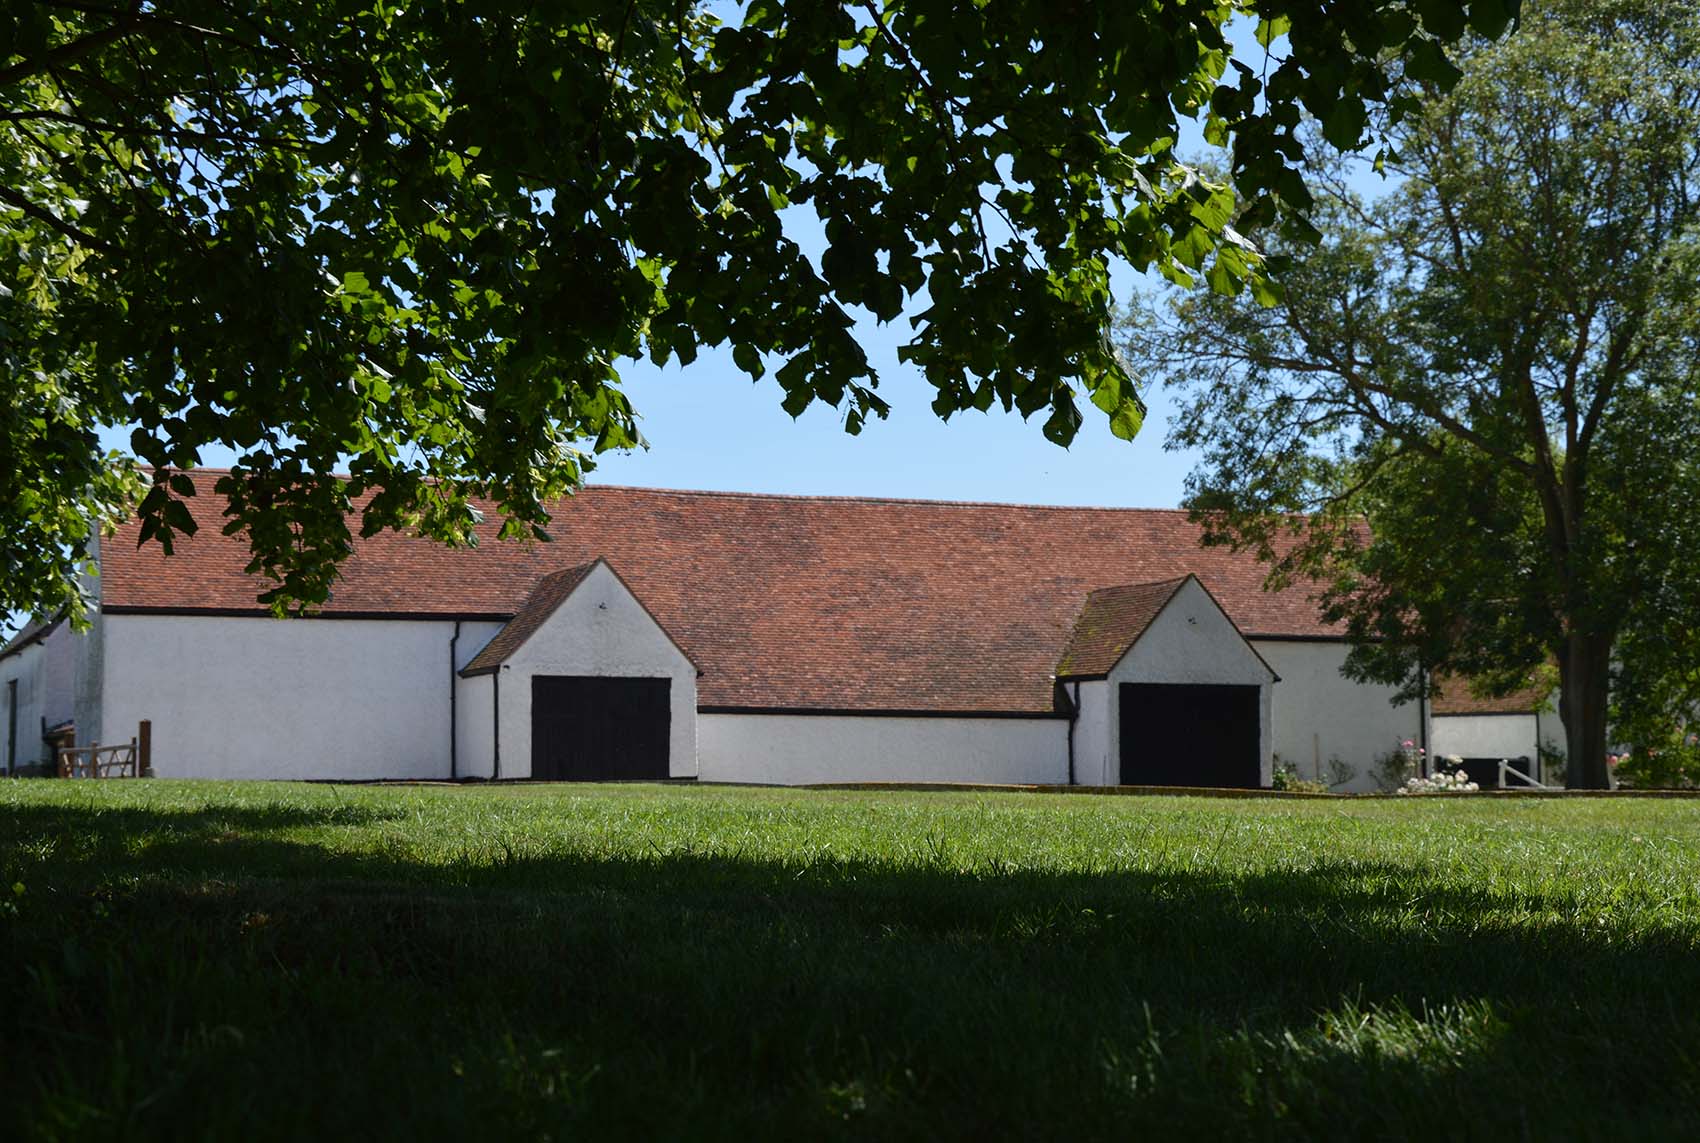 Barn frontage